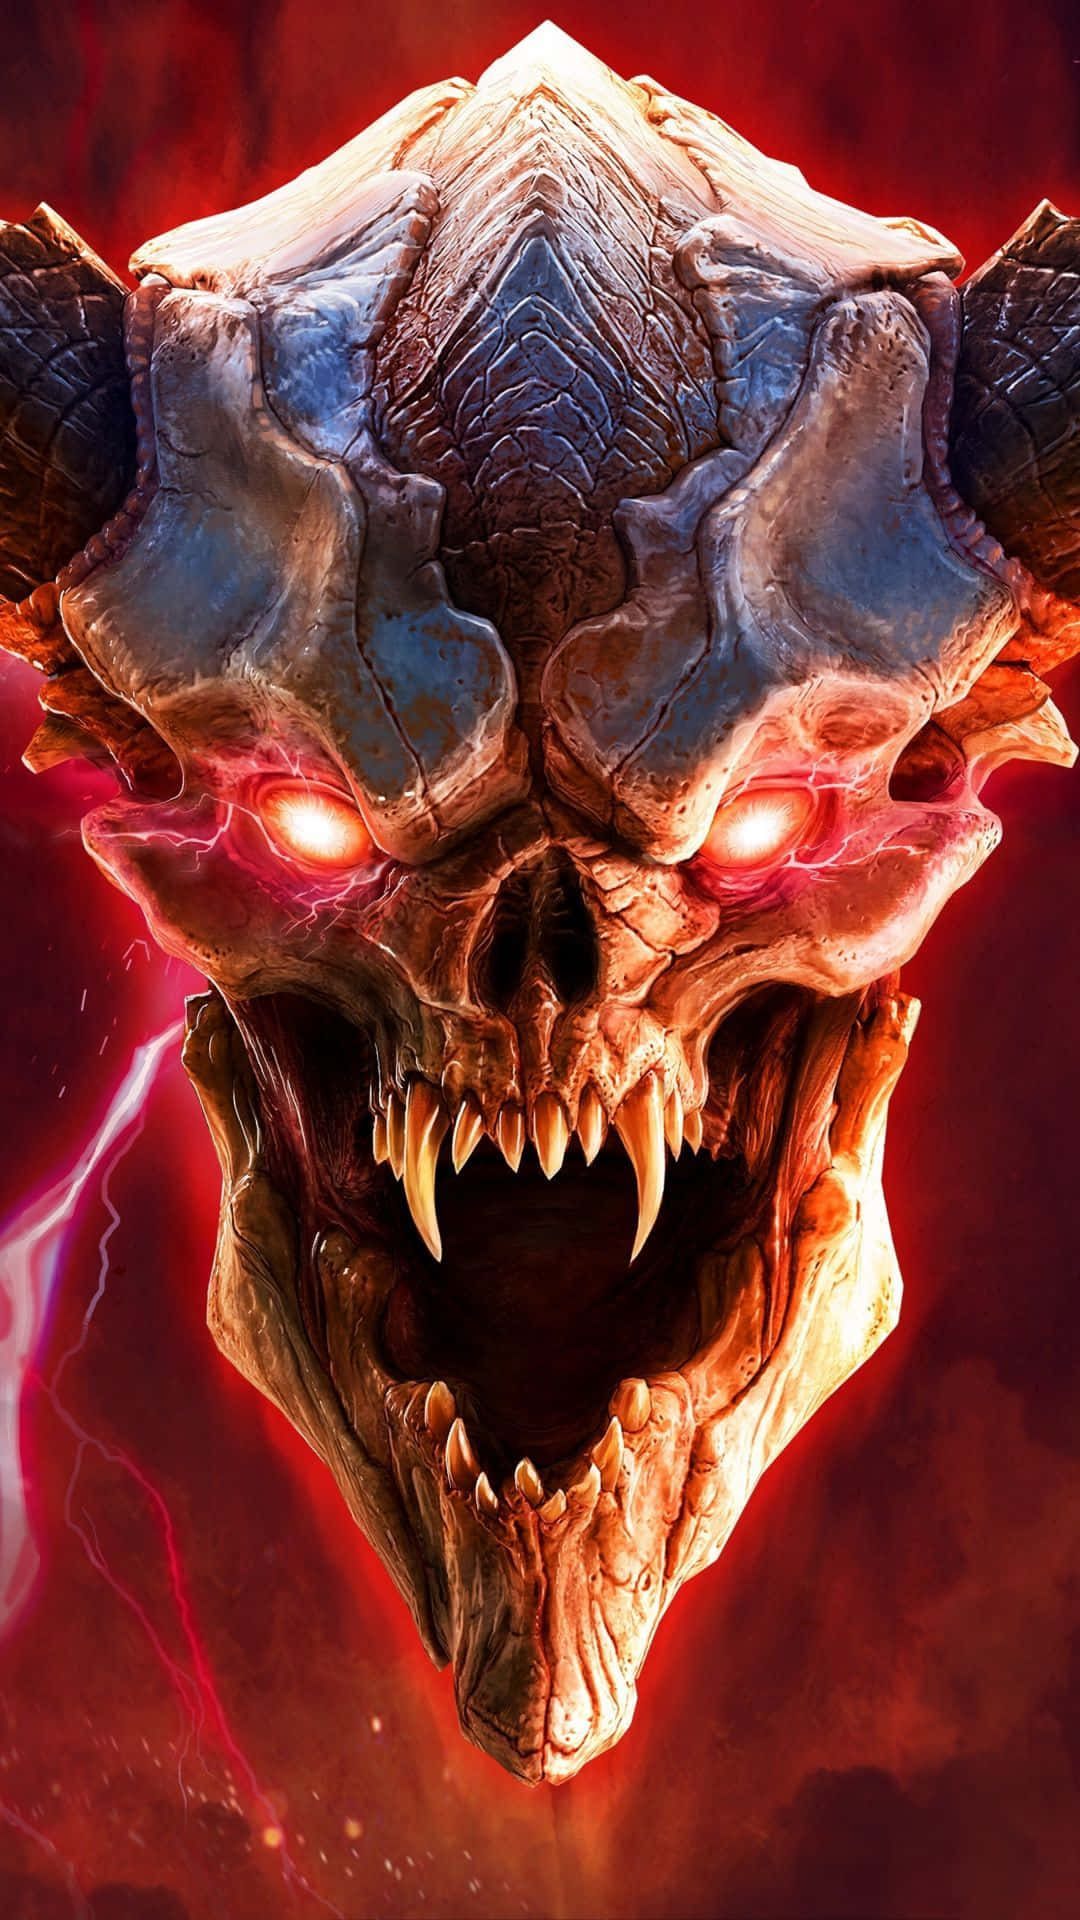 Doom awaits you on your iPhone Wallpaper